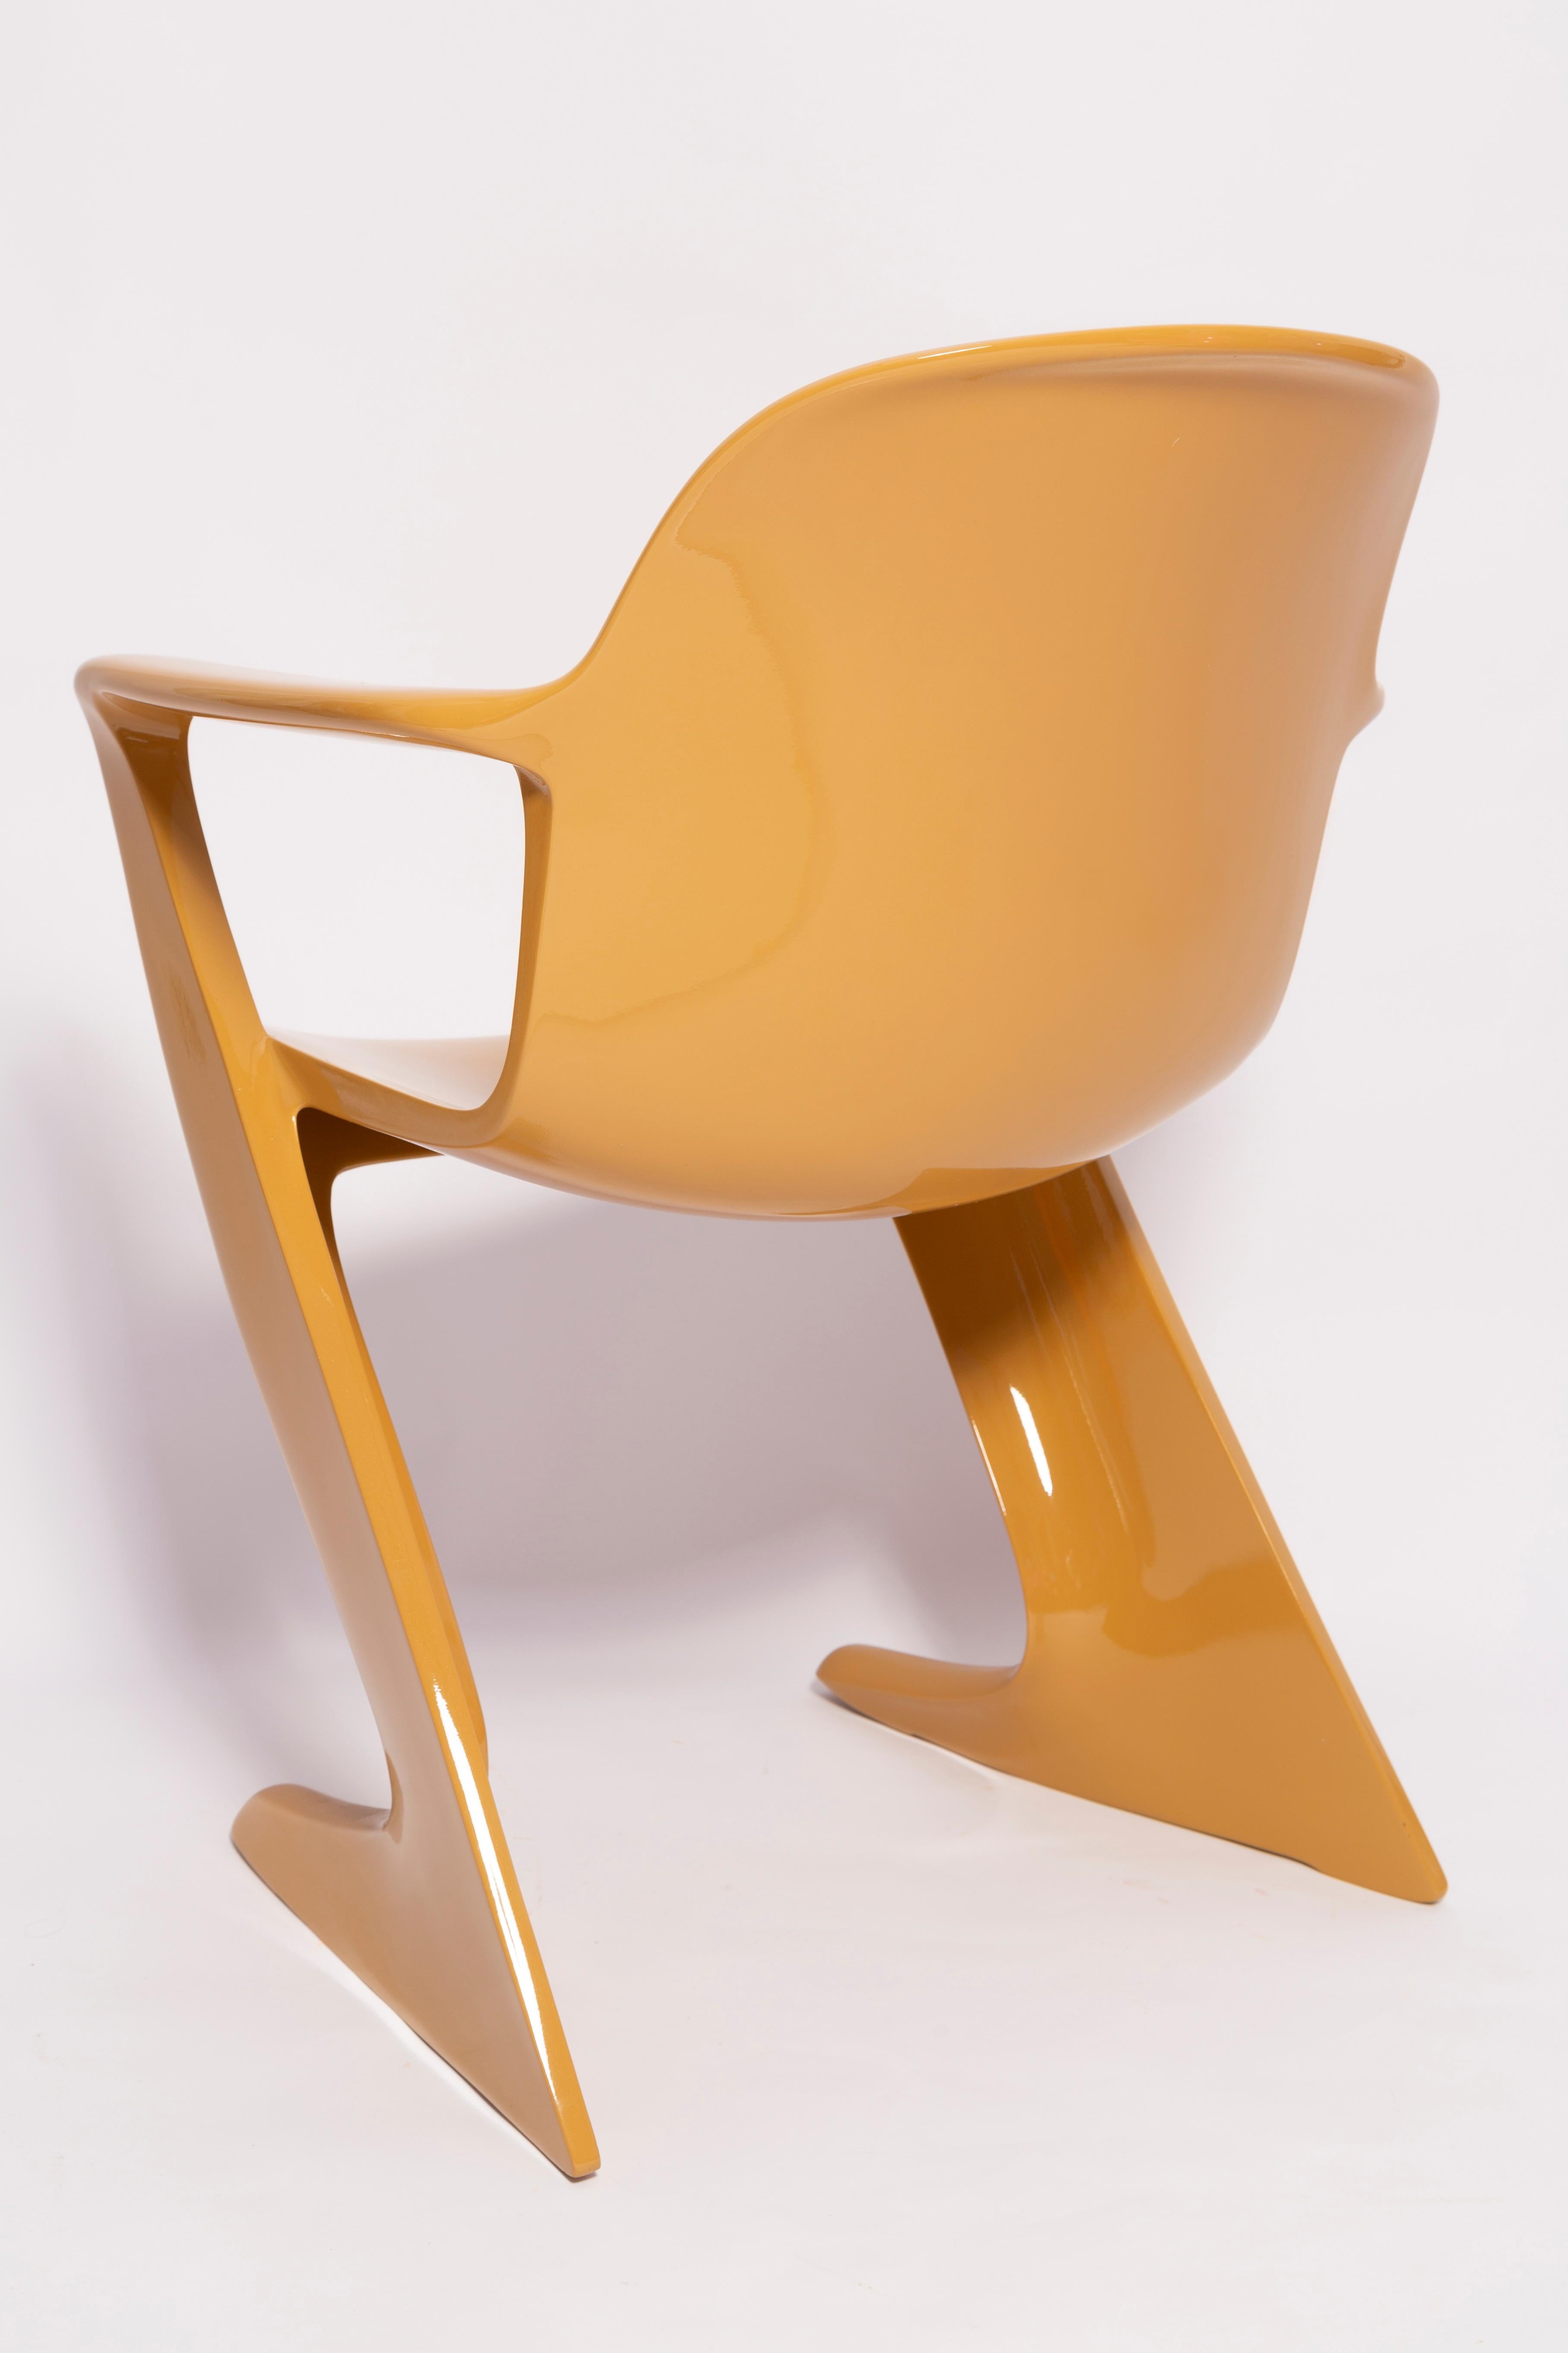 20th Century Mid-Century Sand Beige Kangaroo Chair Designed by Ernst Moeckl, Germany, 1968 For Sale